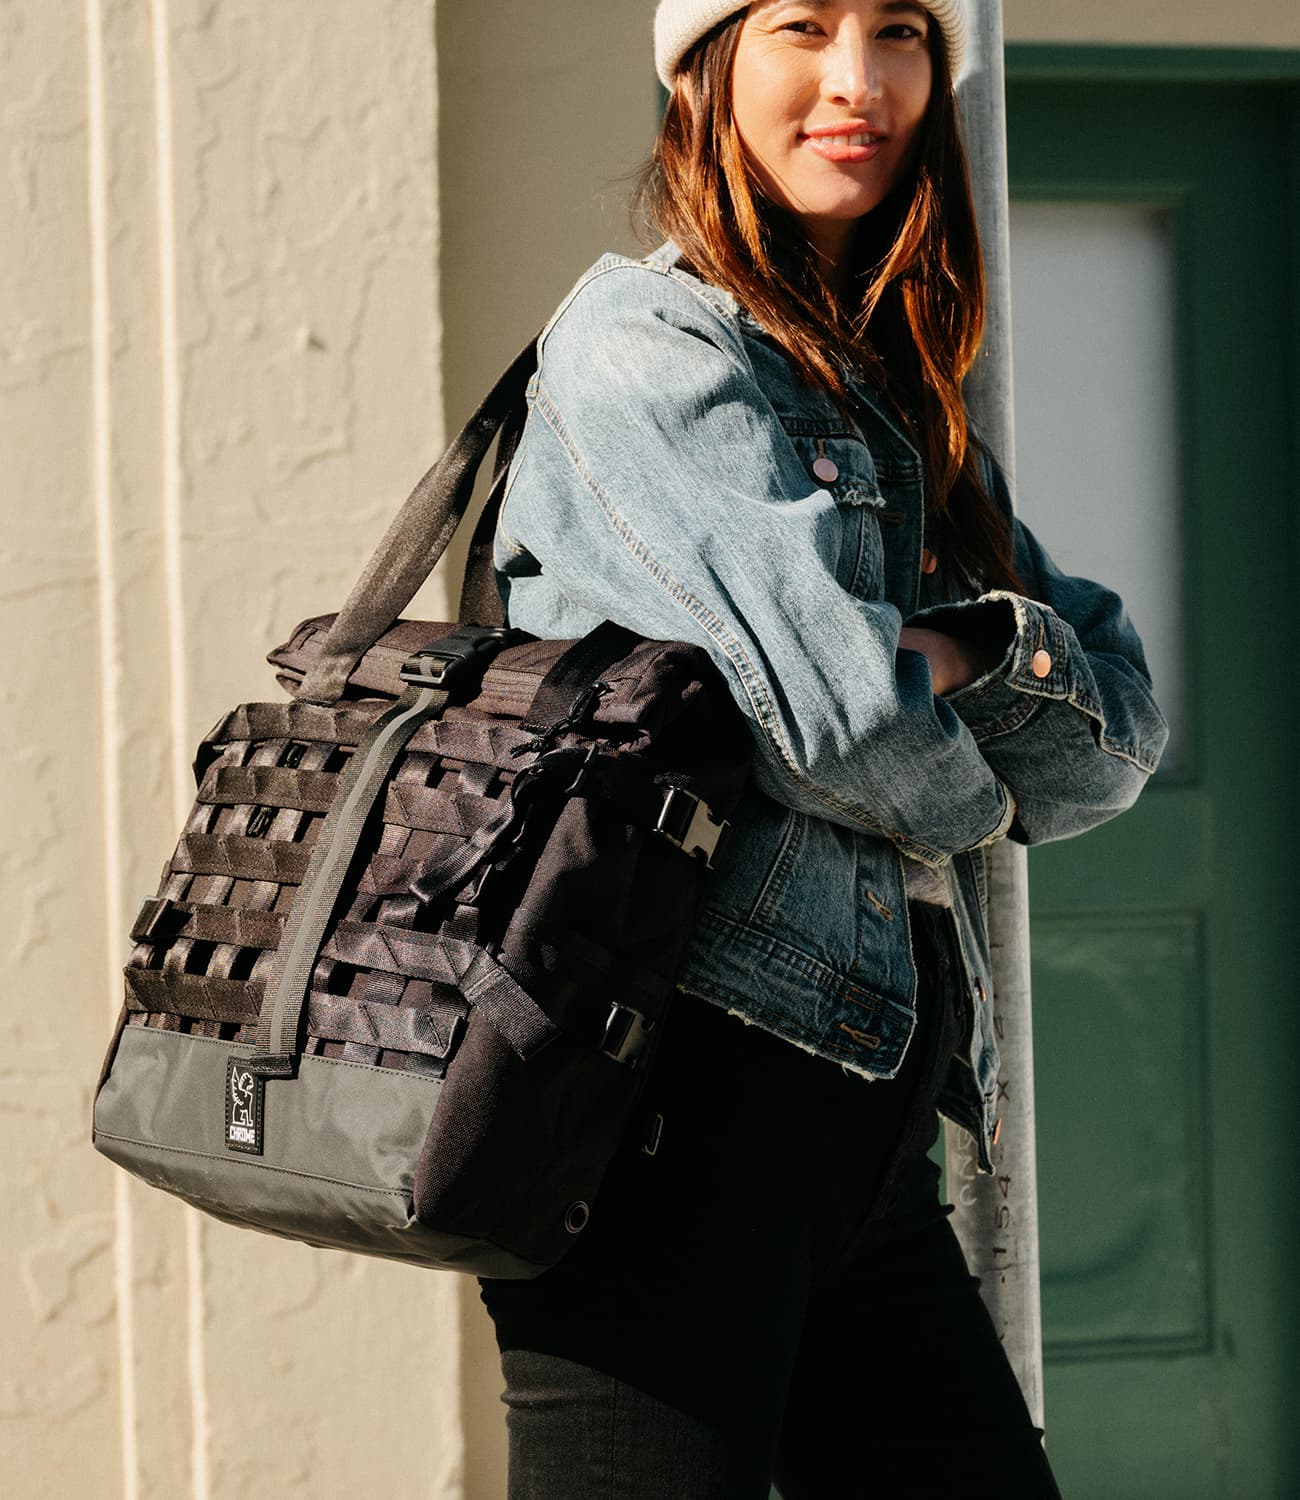 Water-resistant Barrage Tote worn by a person